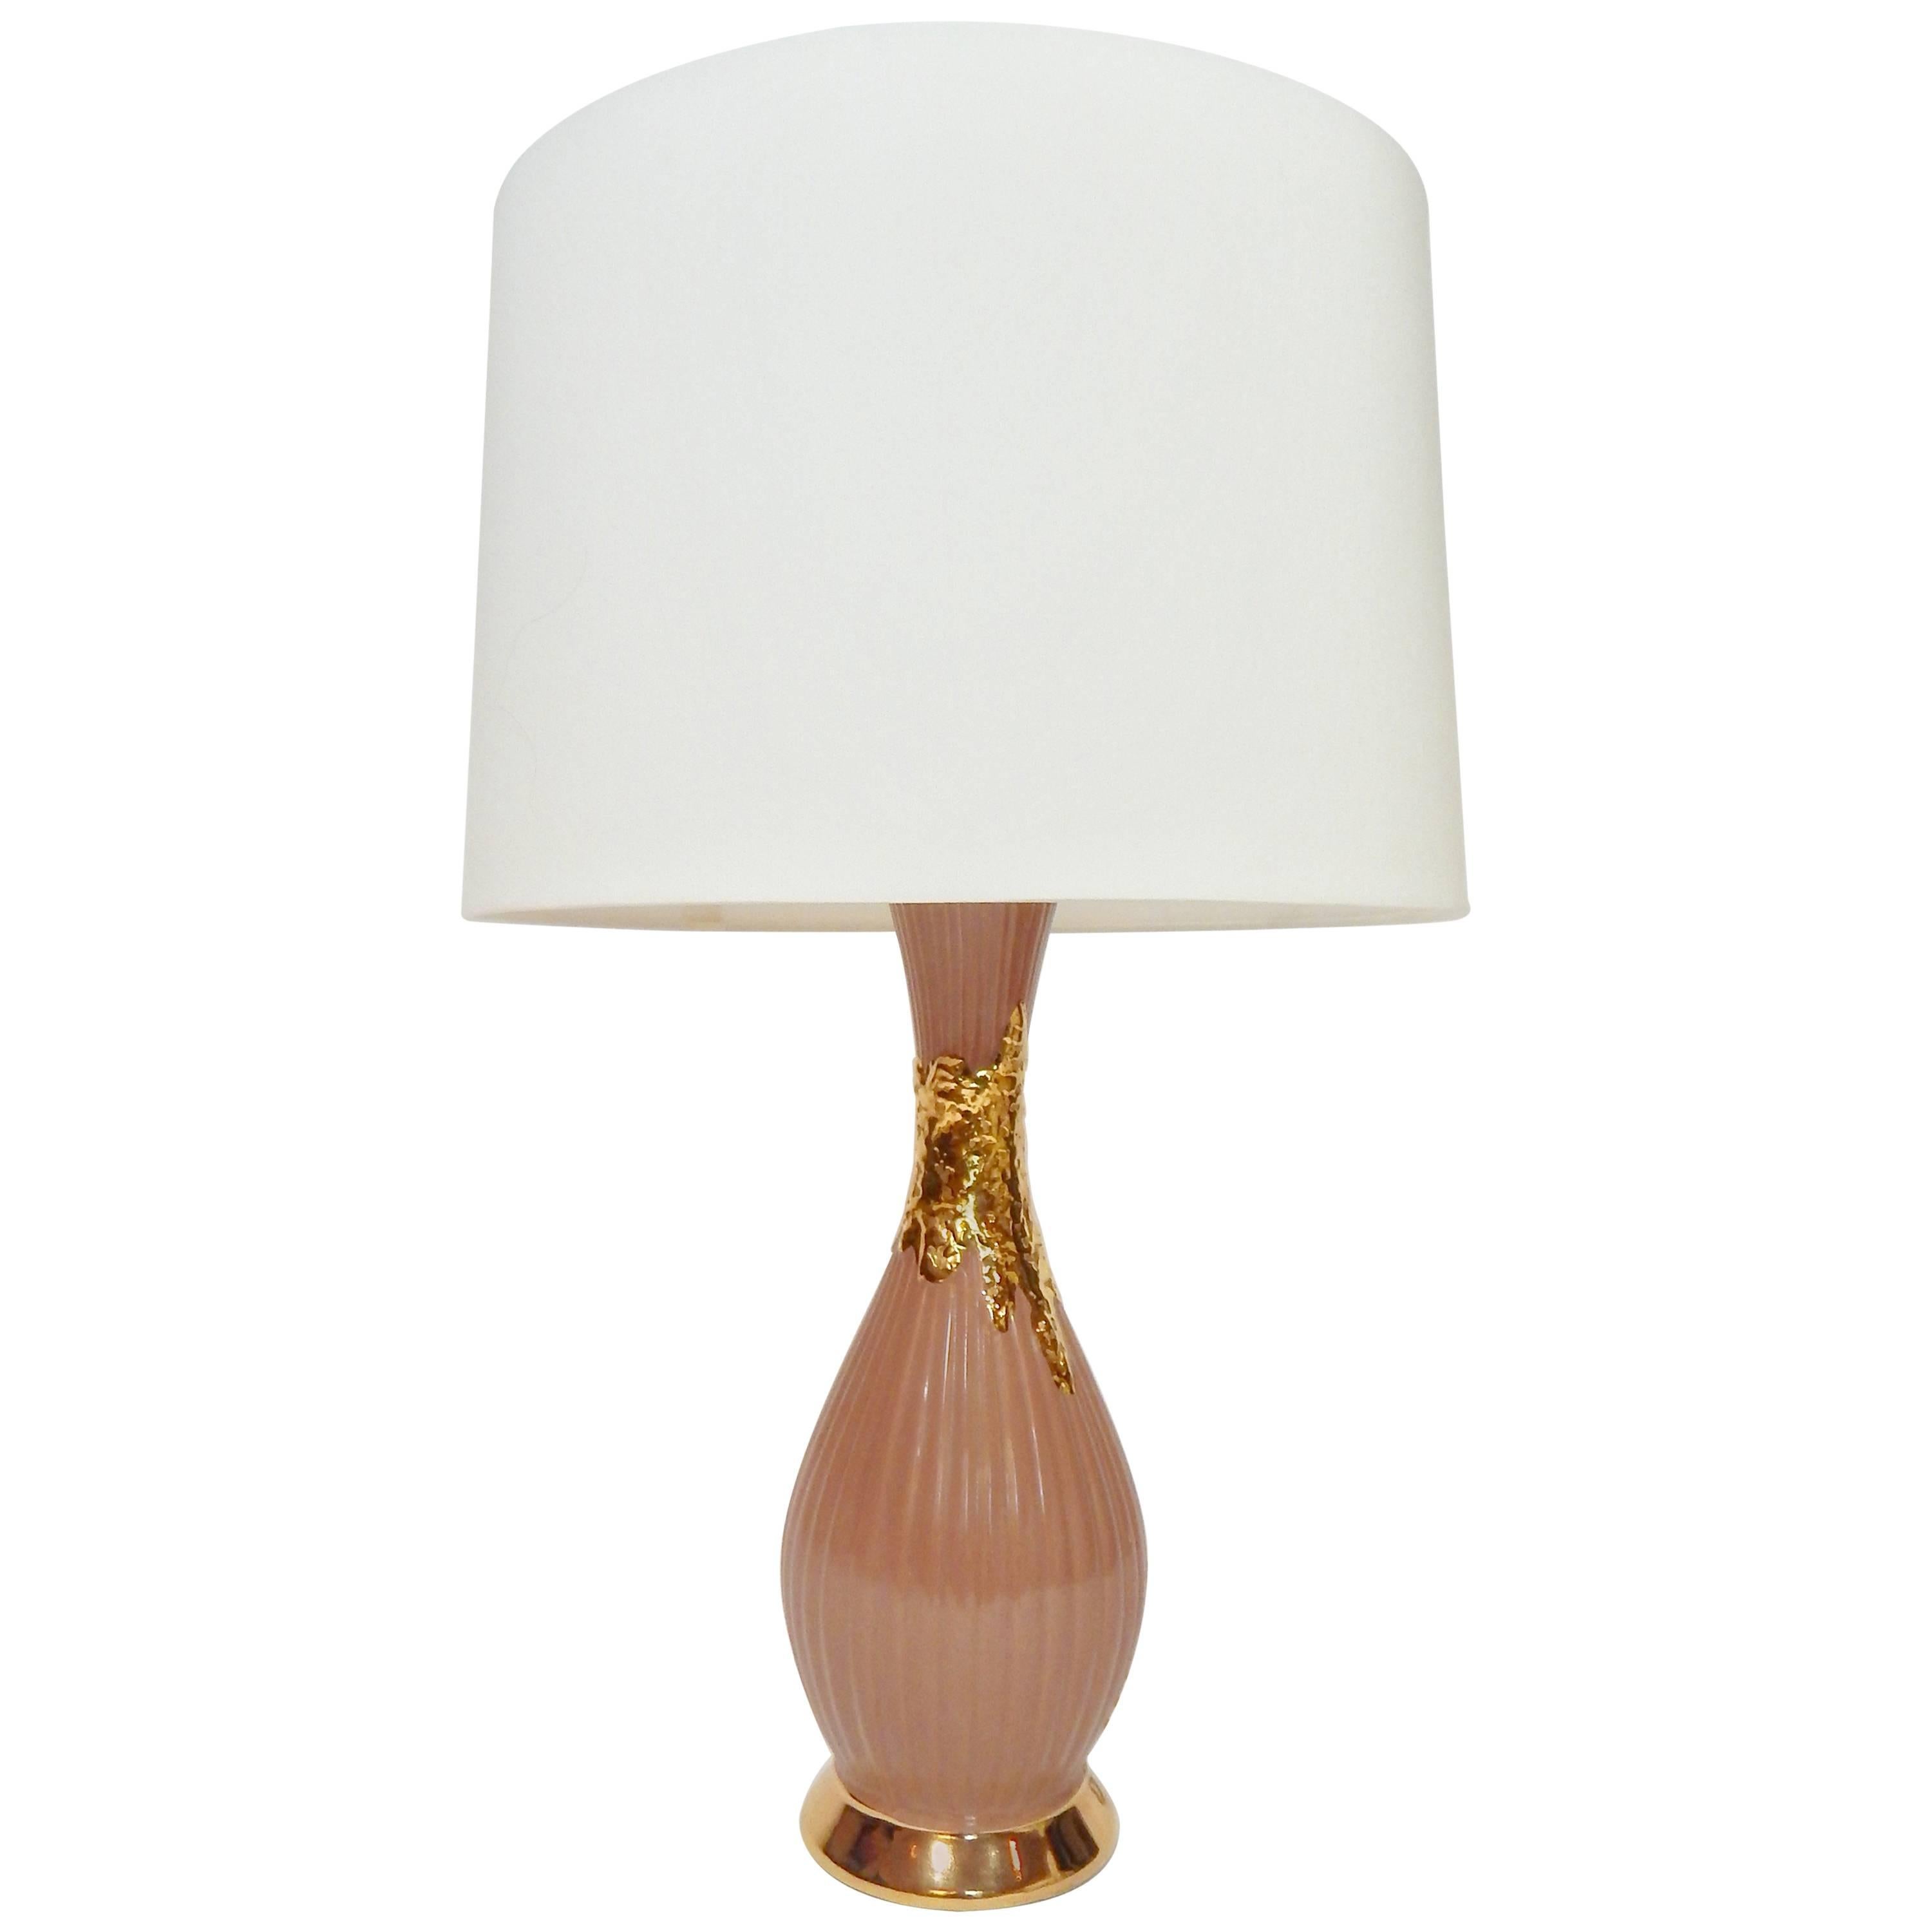 1950s Glamorous Gold and Mauve Glazed Ceramic Table Lamp For Sale